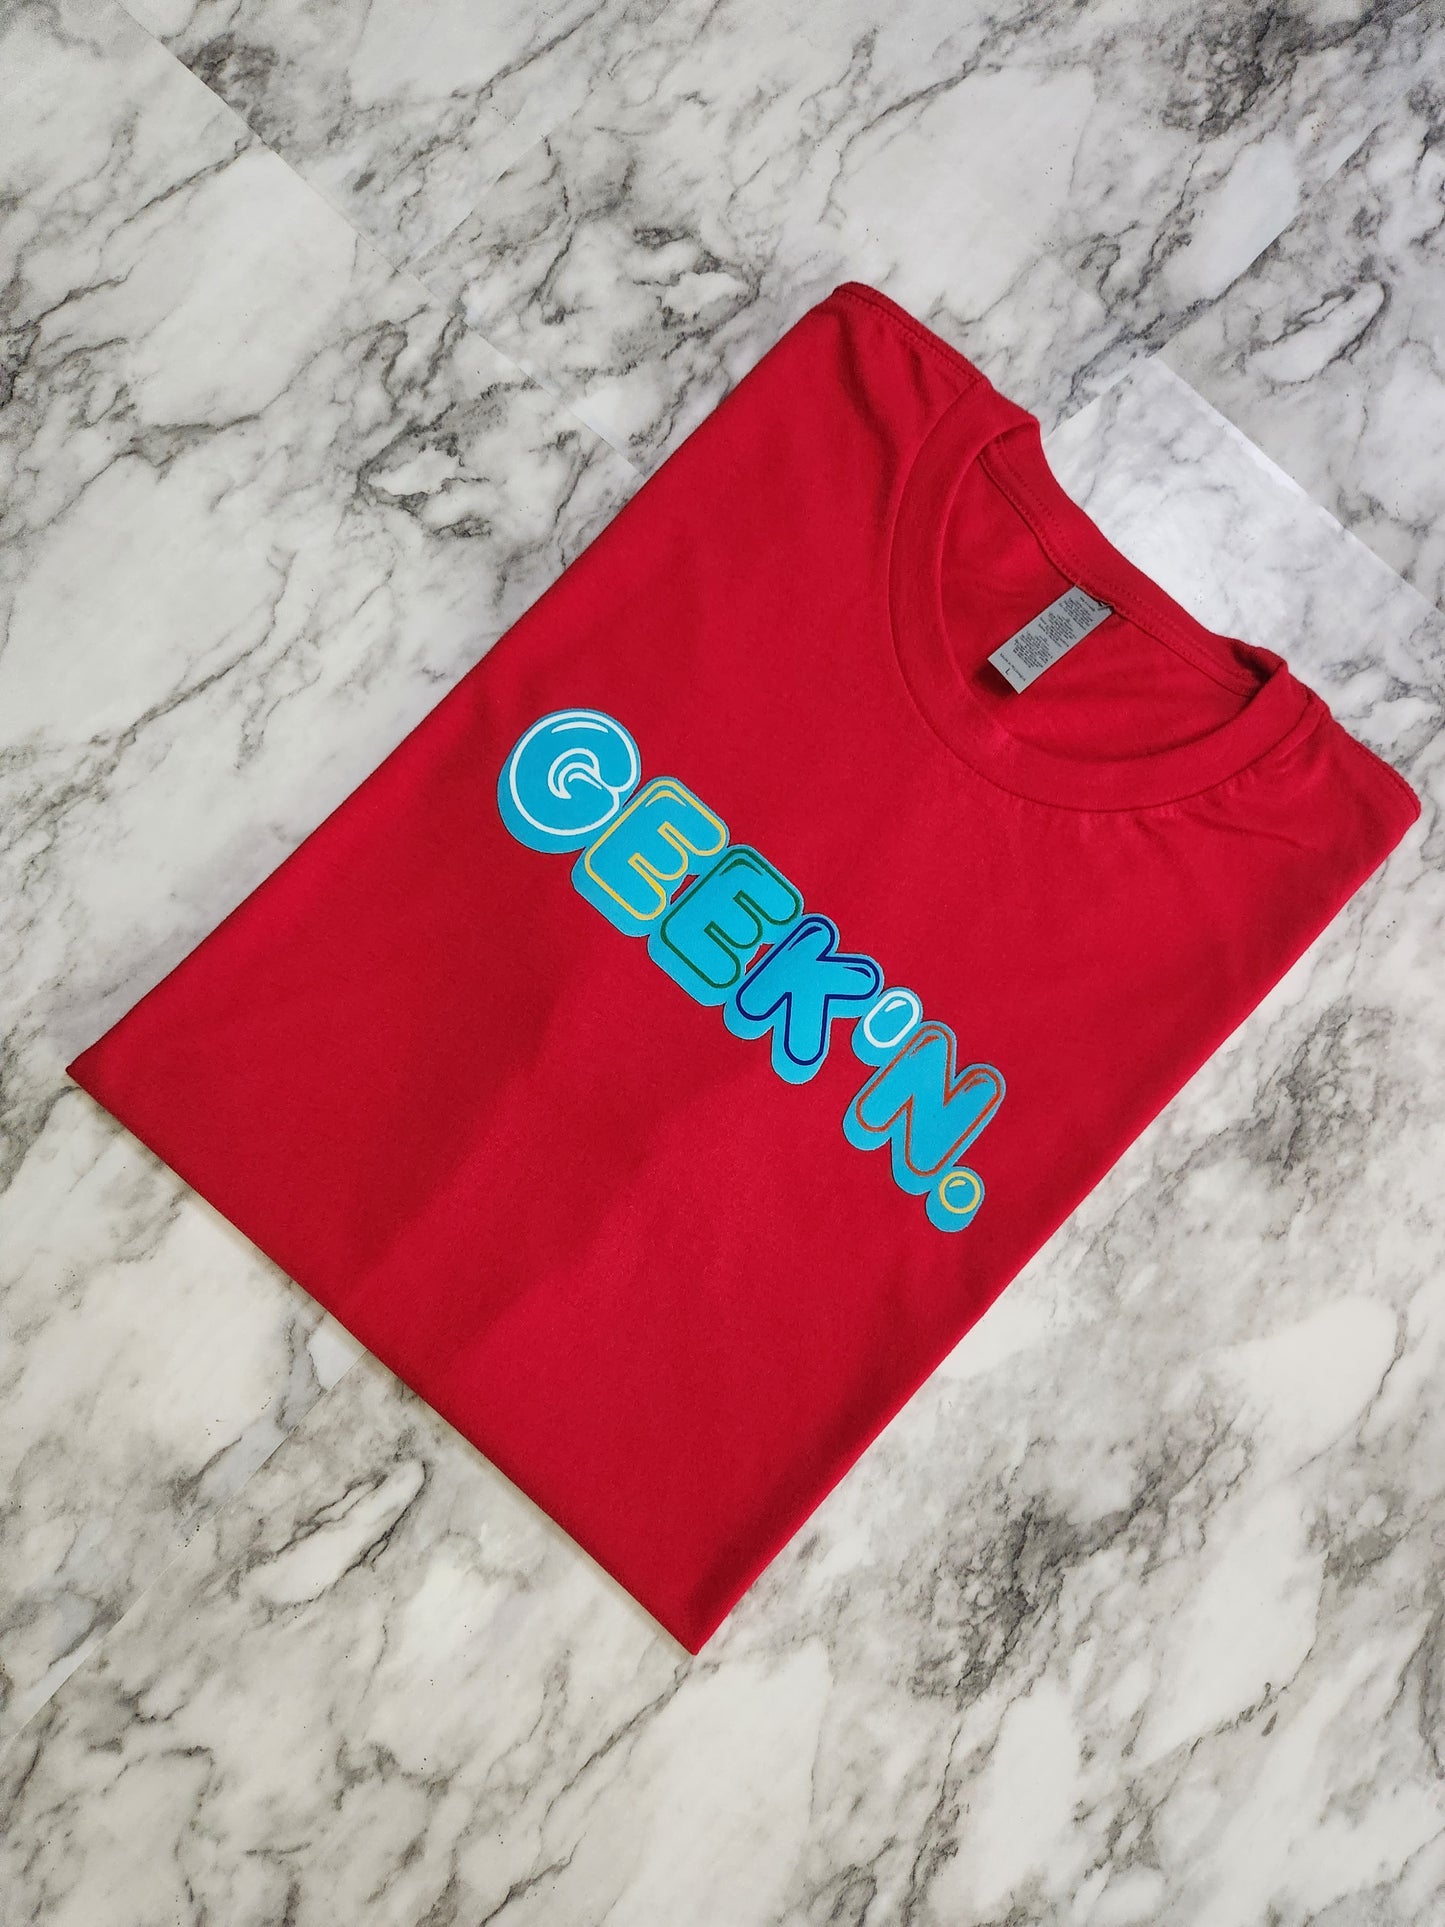 GEEK'N. T-Shirt (Red) - Centre Ave Clothing Co.